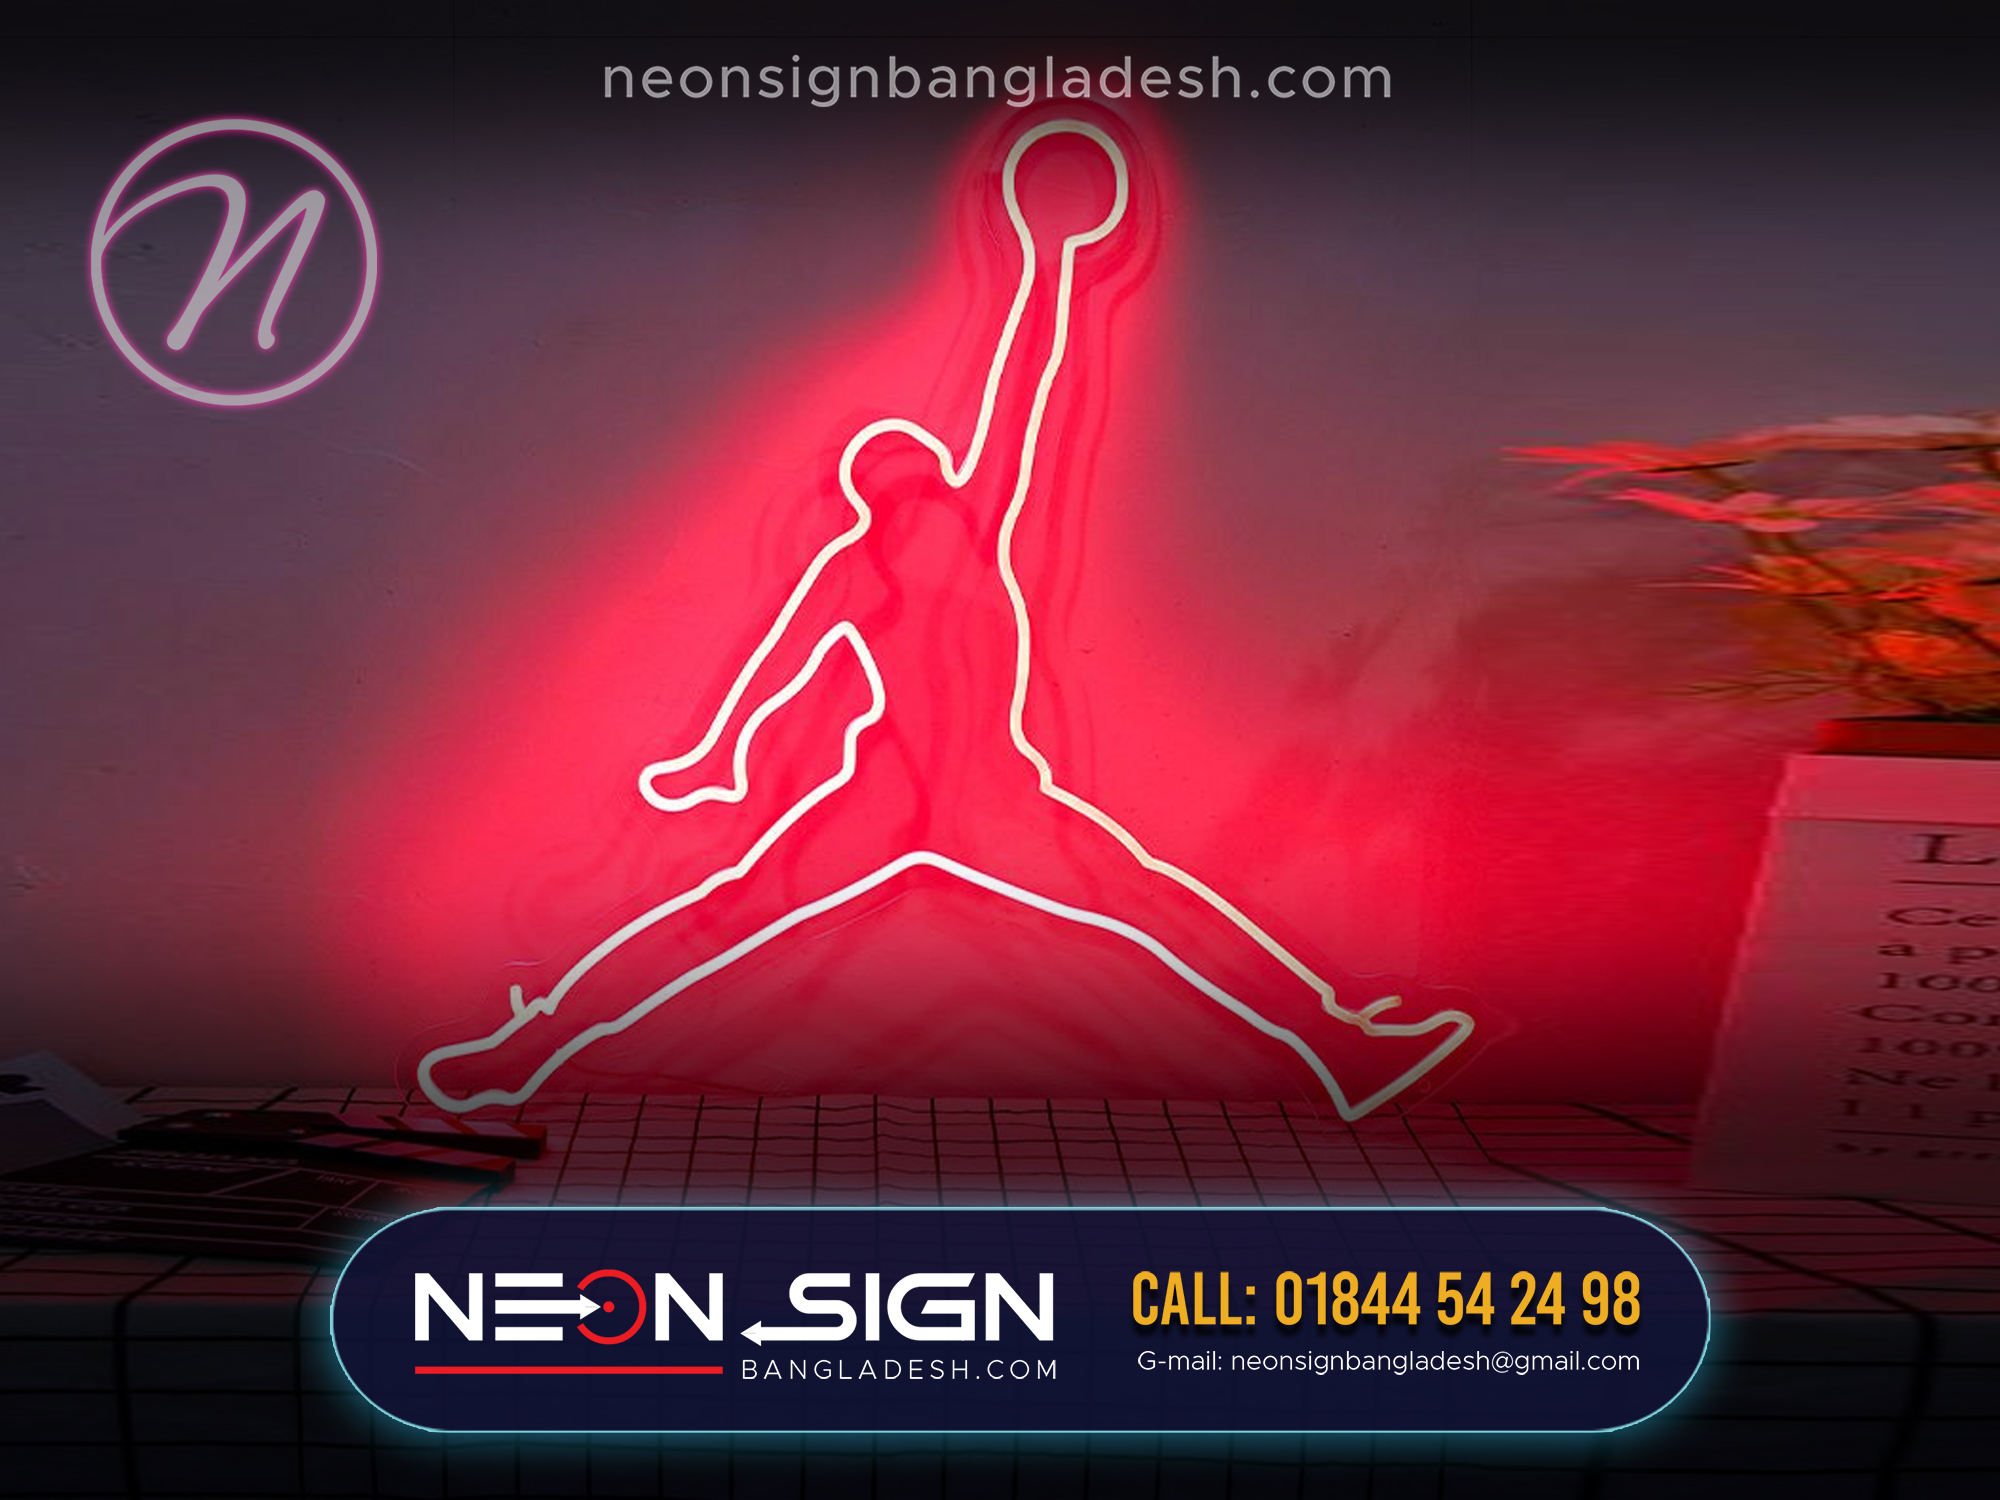 Personalized neon signs for shop signs bd. Outdoor neon signs for shop signs bd. Customizable neon signs for shop signs bd. Custom neon signs for shop signs bd. Best neon signs for shop signs bd. neon sign price in bd. bangladesh neon sign. custom neon signs bd.